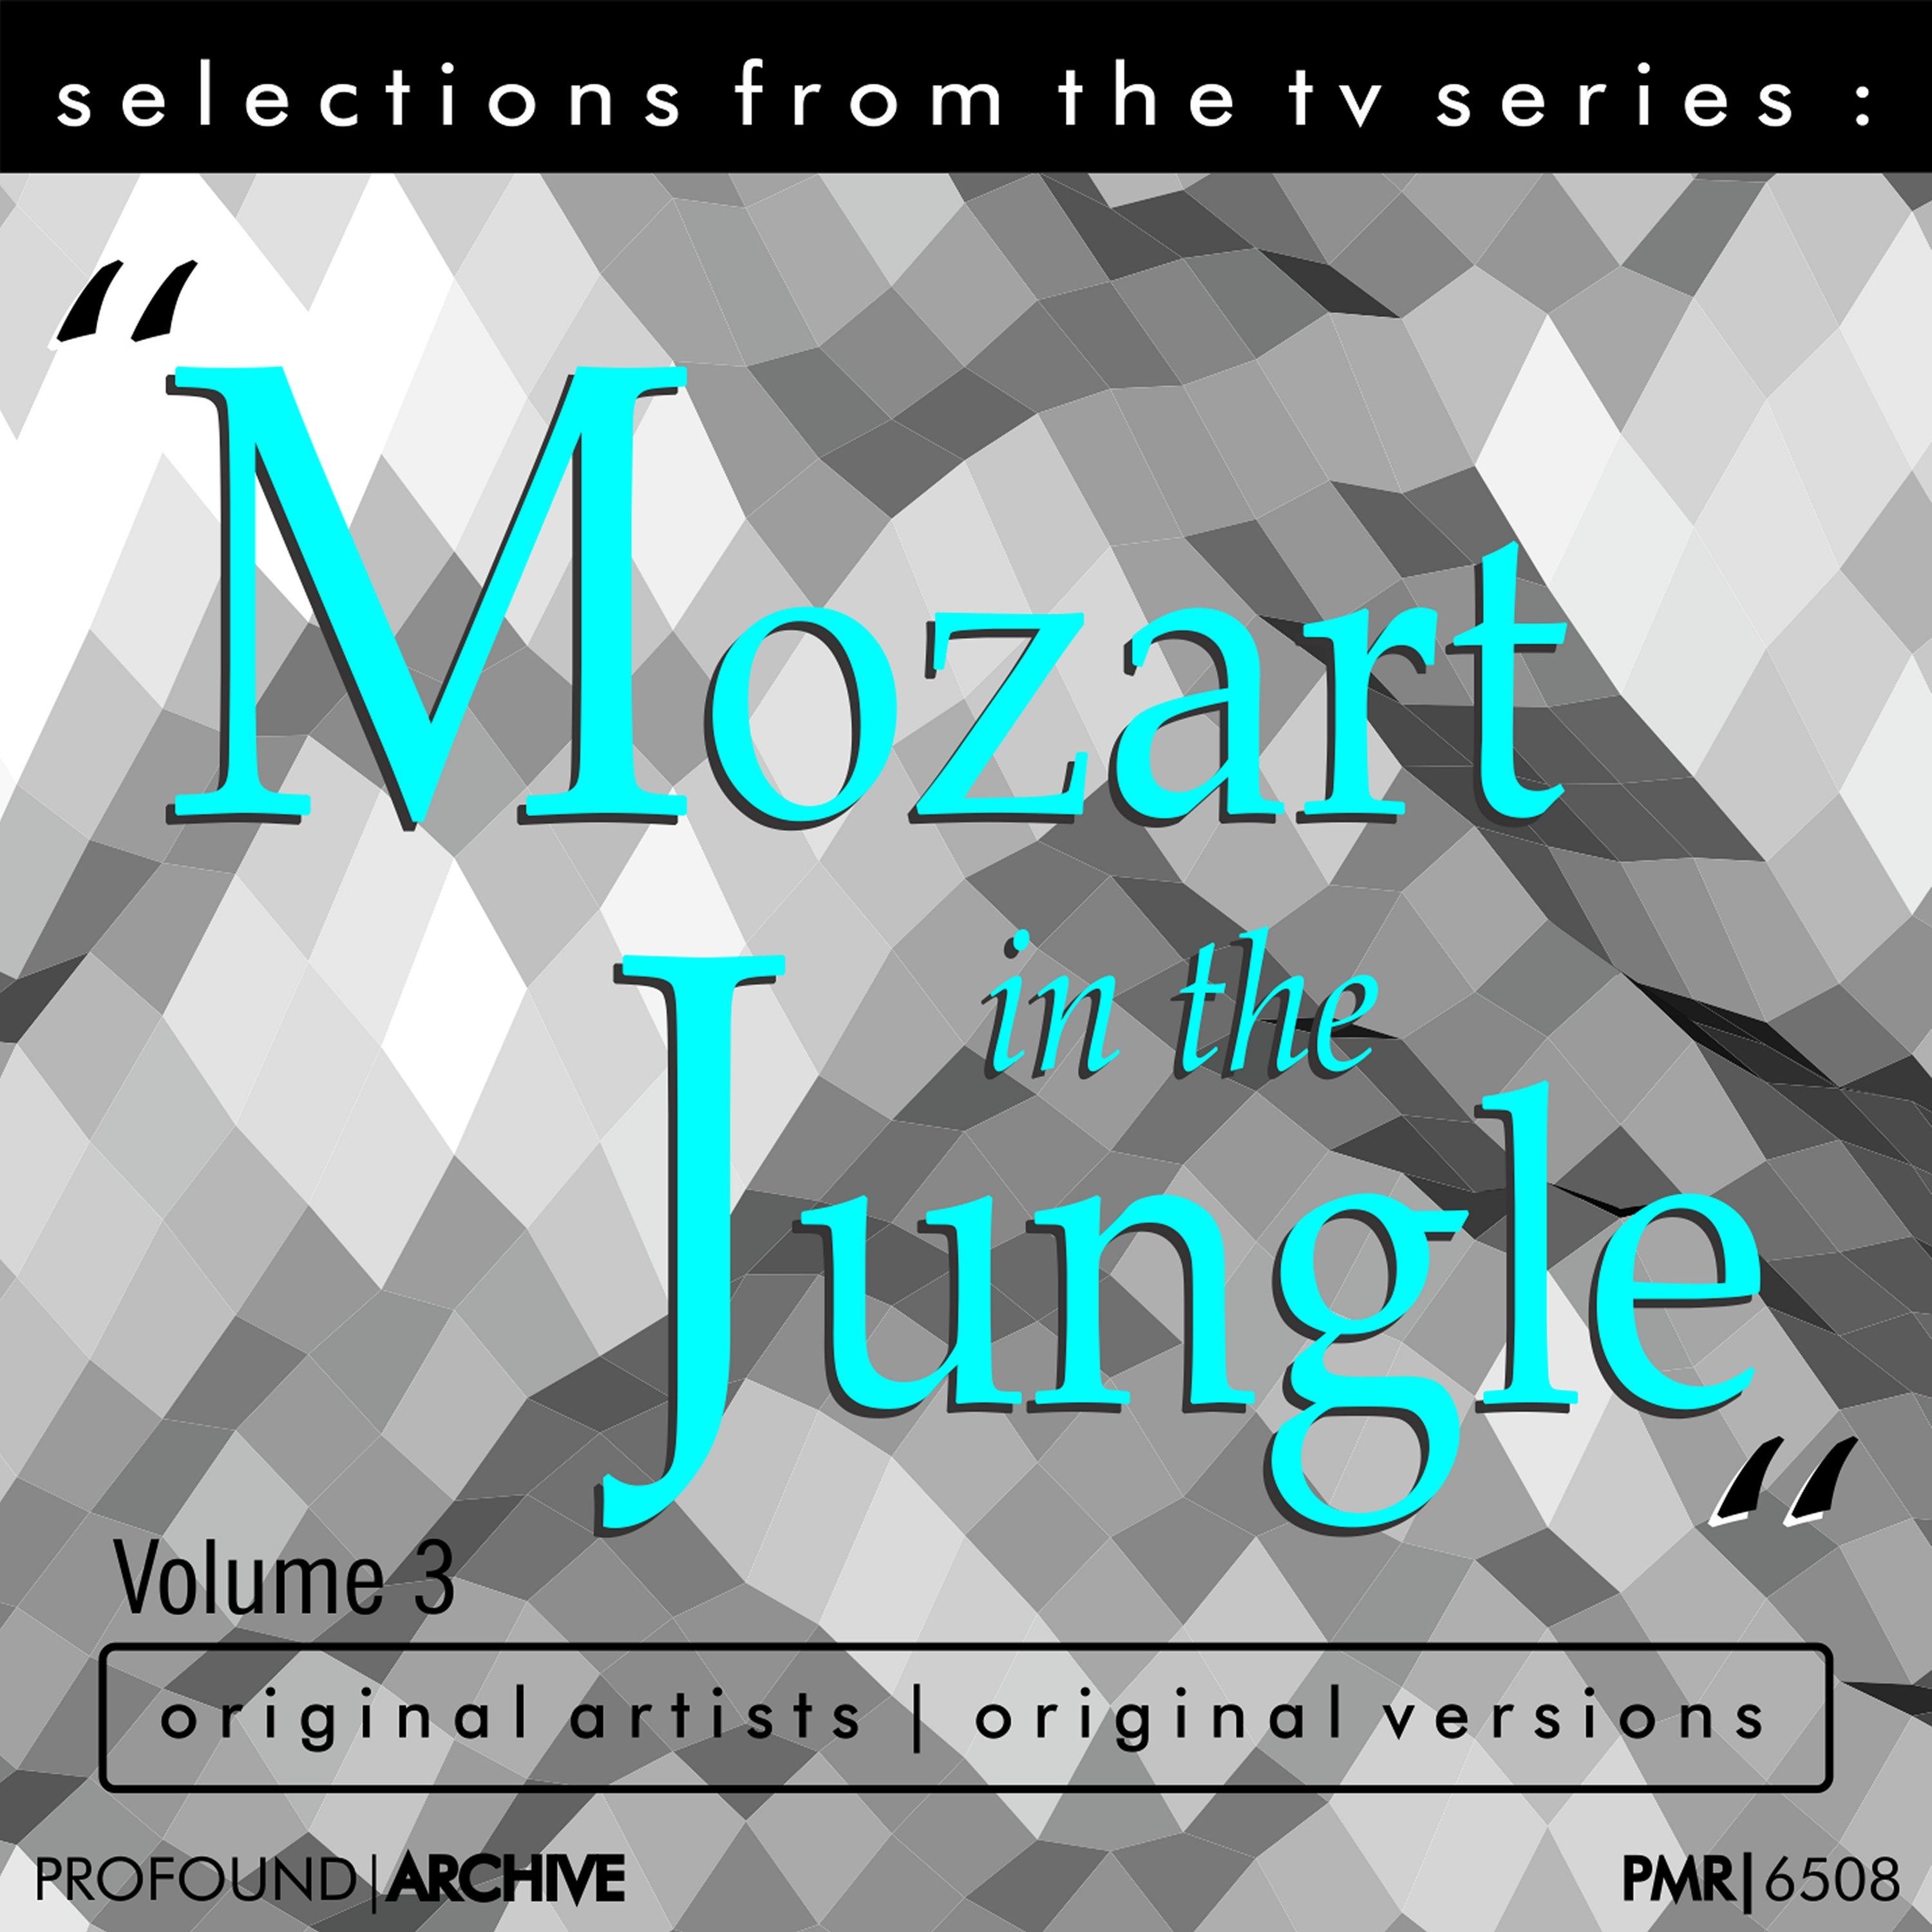 Selections from the TV Serie Mozart in the Jungle Volume 3